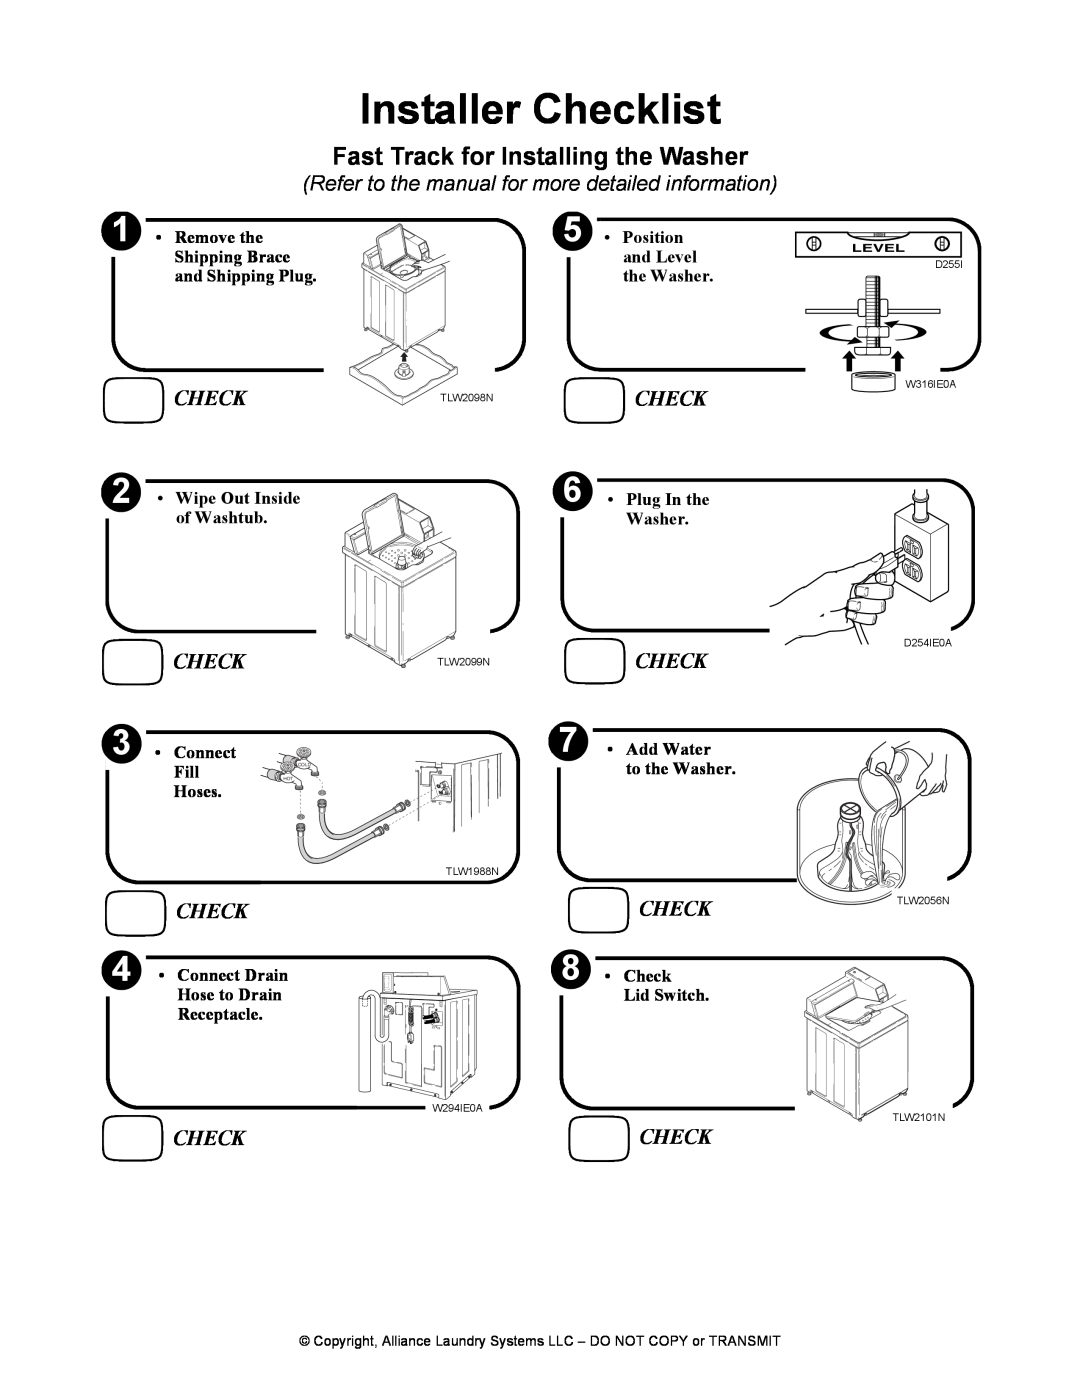 Alliance Laundry Systems TLW12CTLW12C manual Installer Checklist, Fast Track for Installing the Washer 